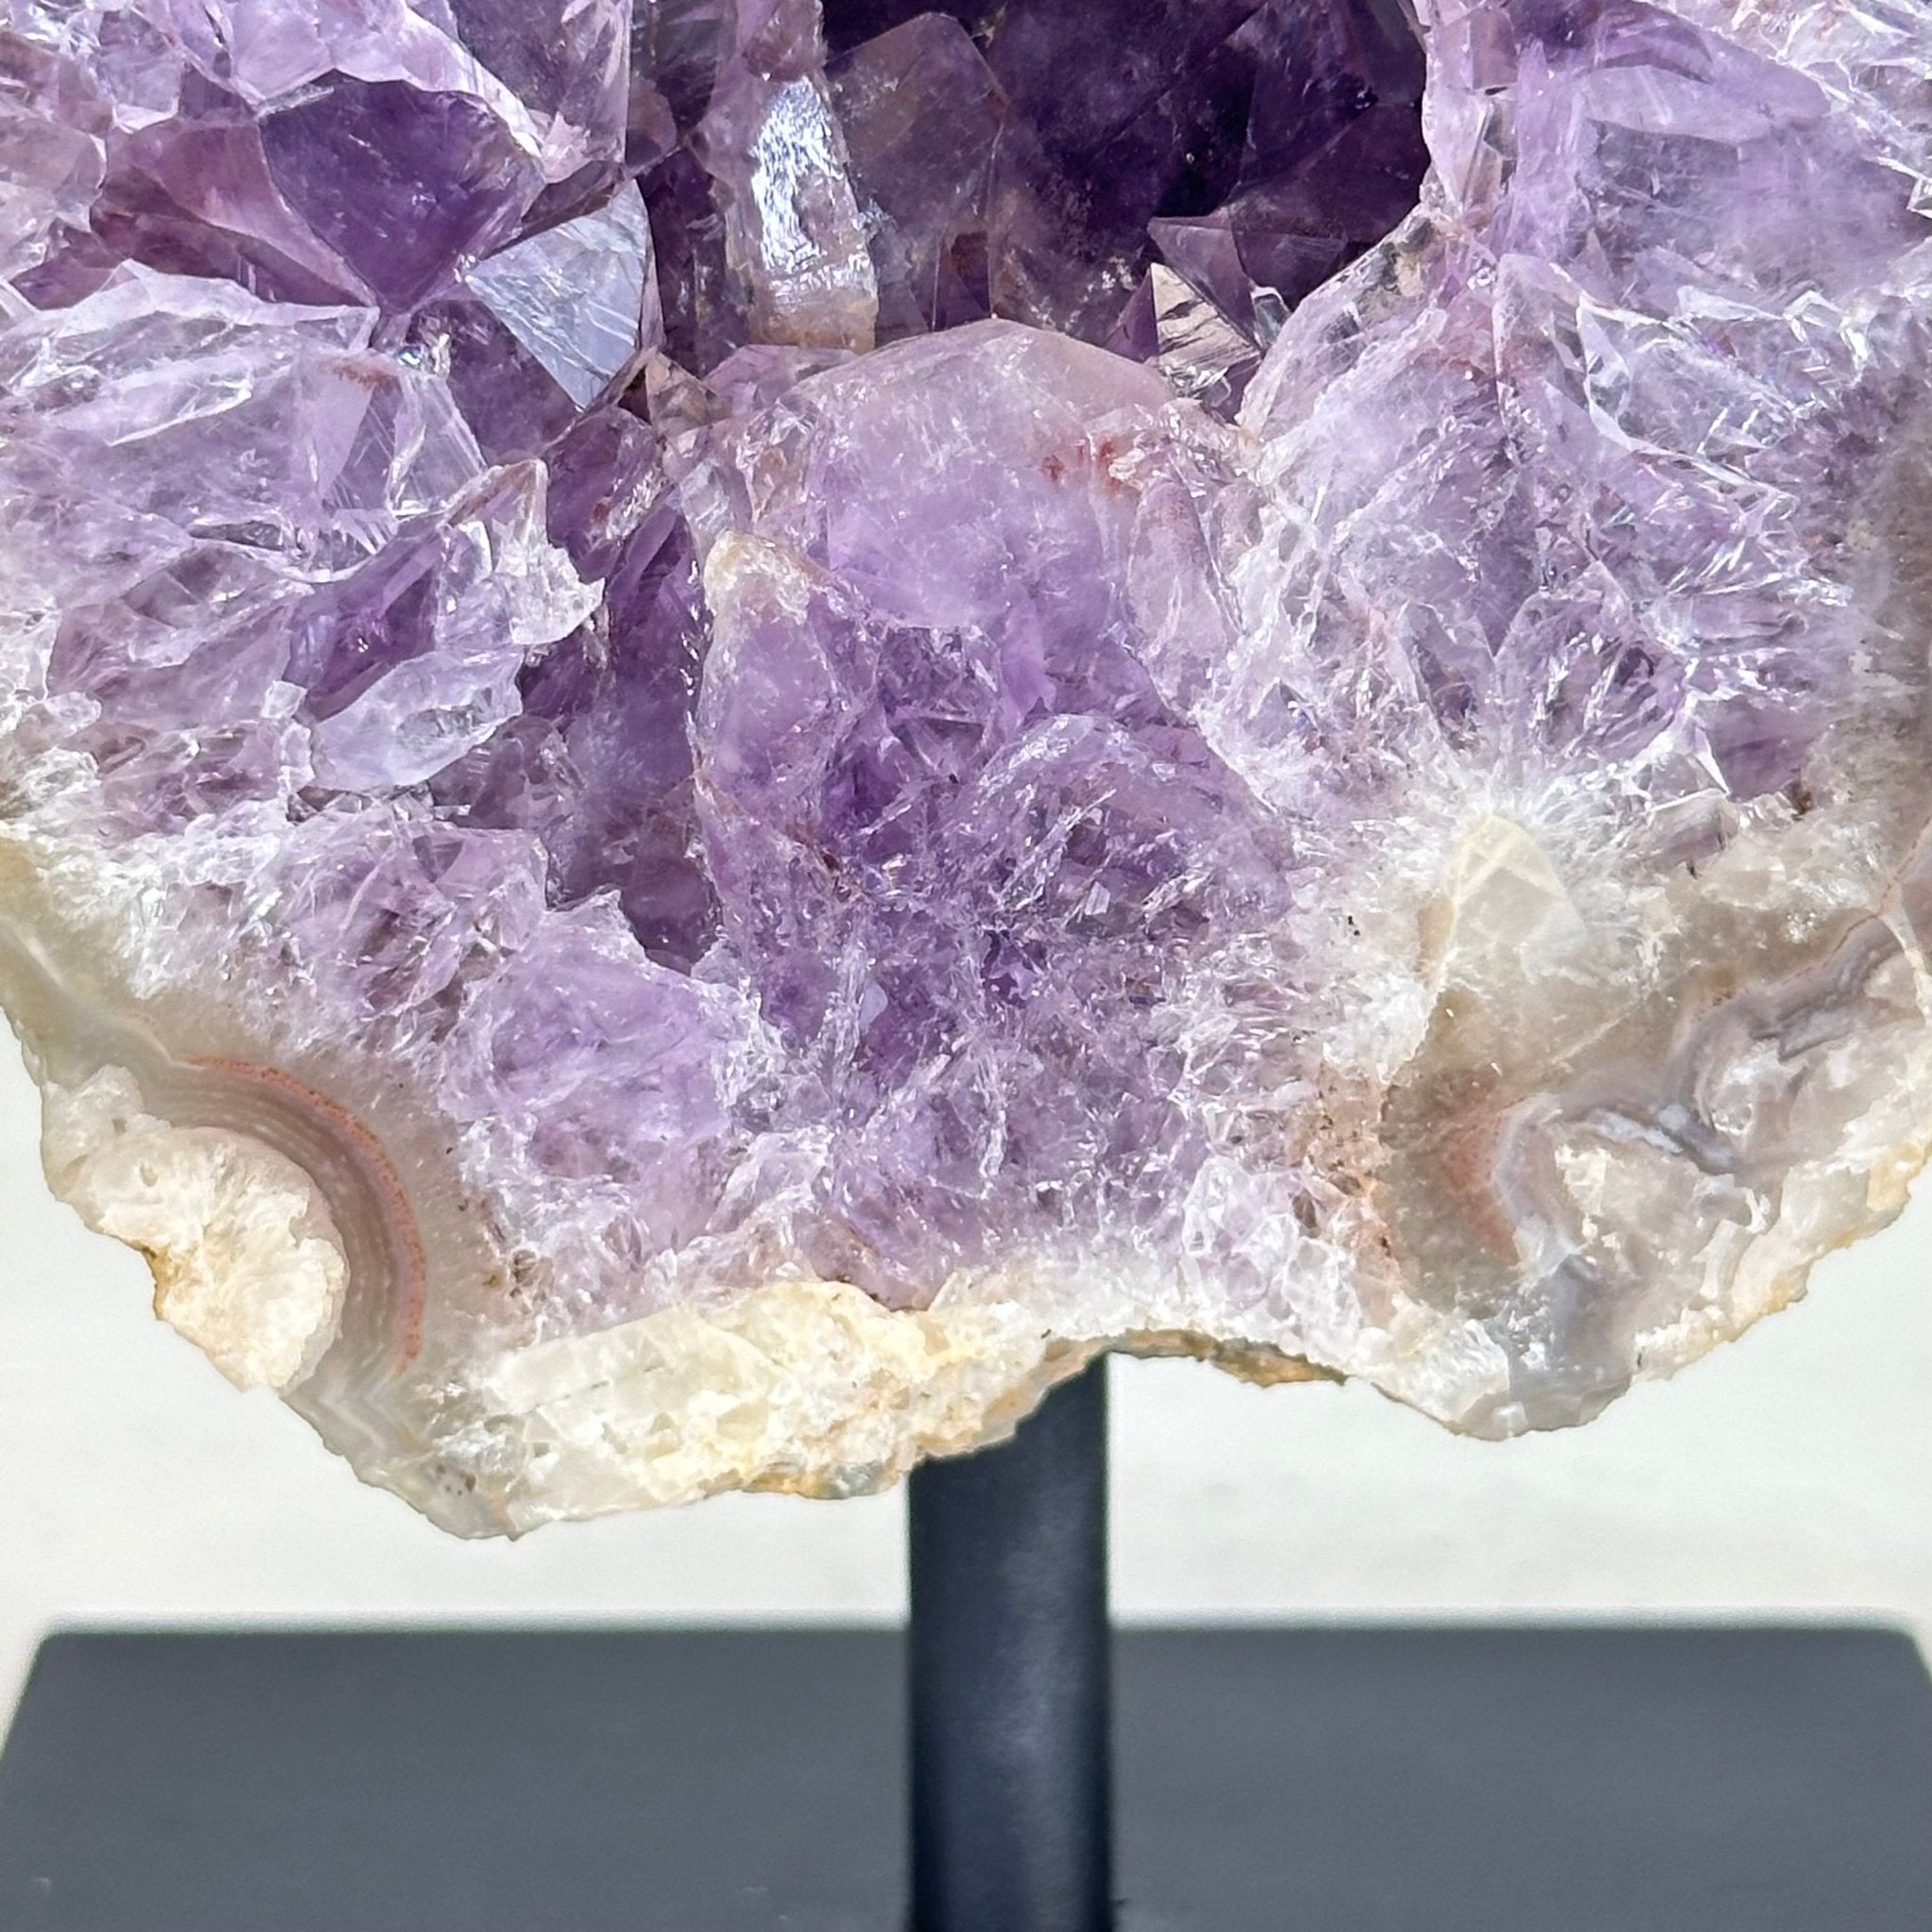 Amethyst Cluster on a Metal Base, 3.2 lbs & 6.3" Tall #5491-0168 - Brazil GemsBrazil GemsAmethyst Cluster on a Metal Base, 3.2 lbs & 6.3" Tall #5491-0168Clusters on Fixed Bases5491-0168